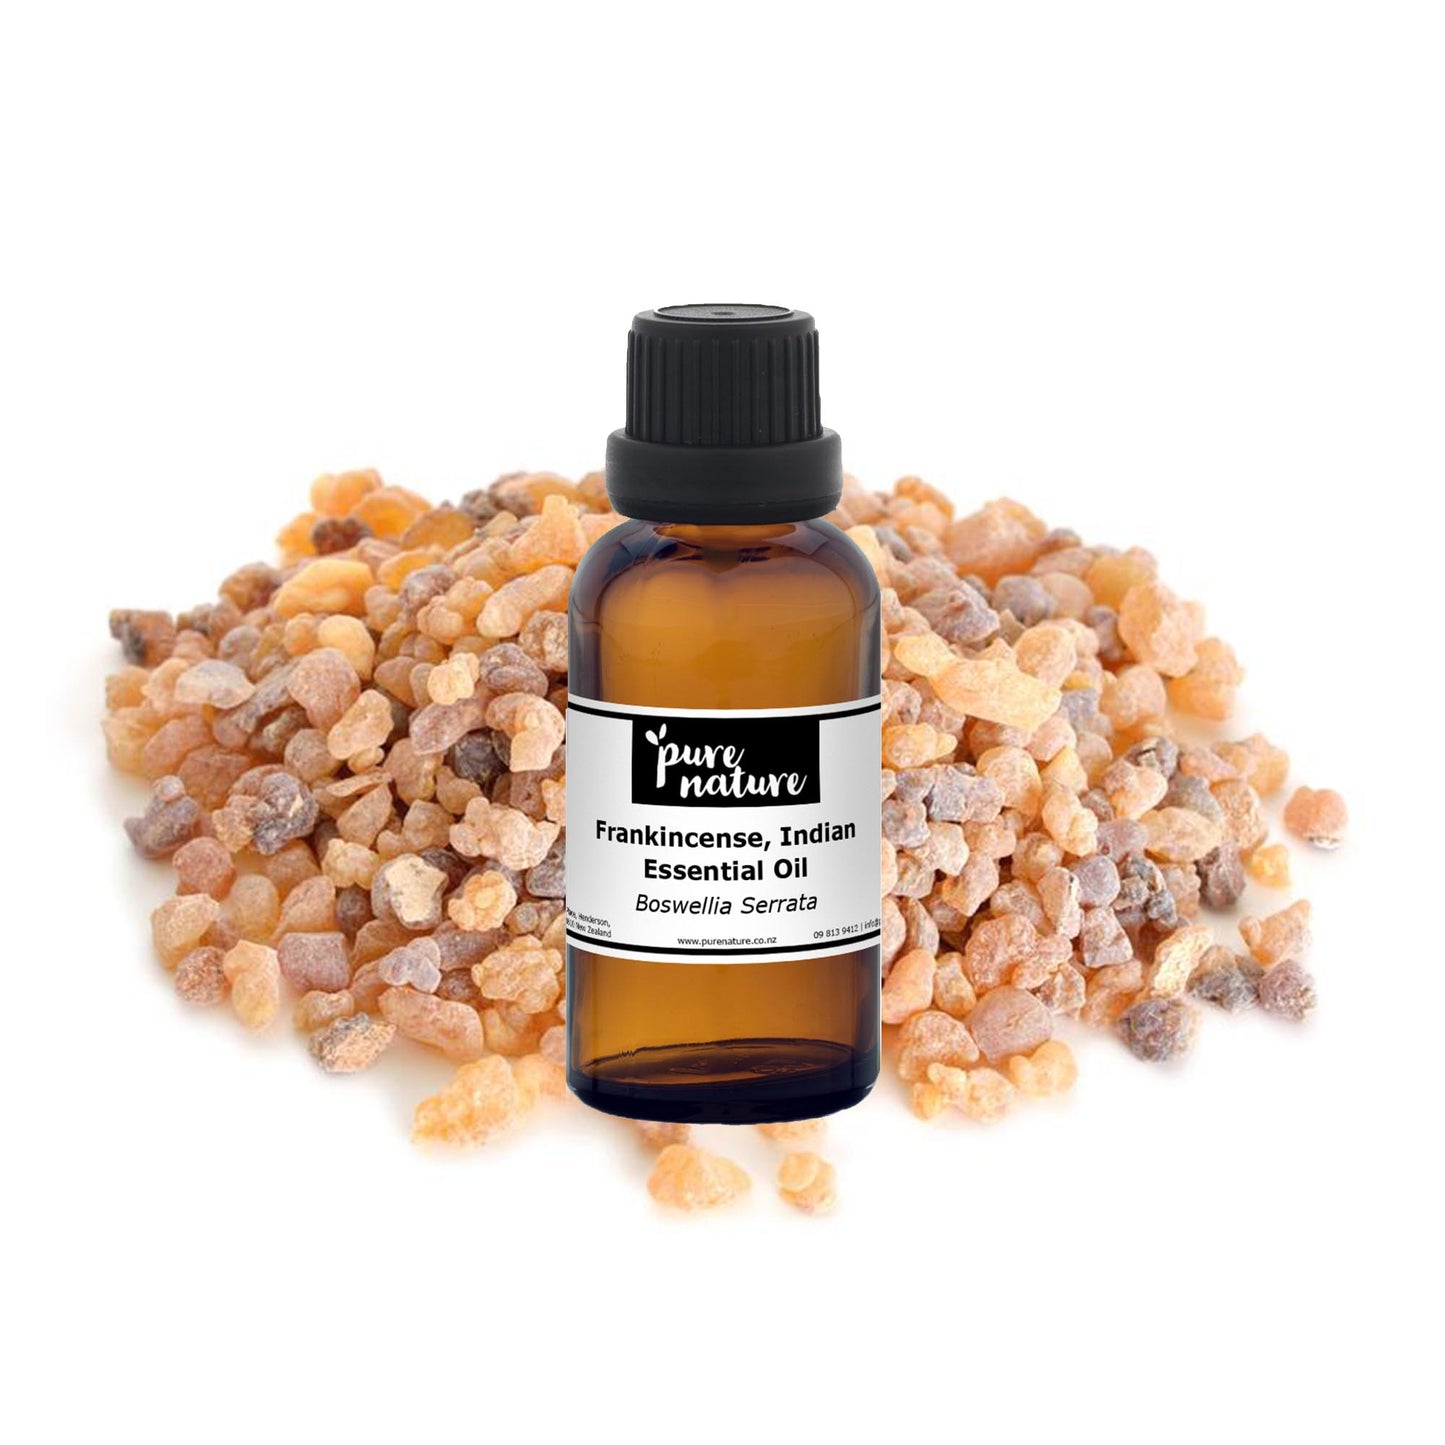 Frankincense, Indian Essential Oil